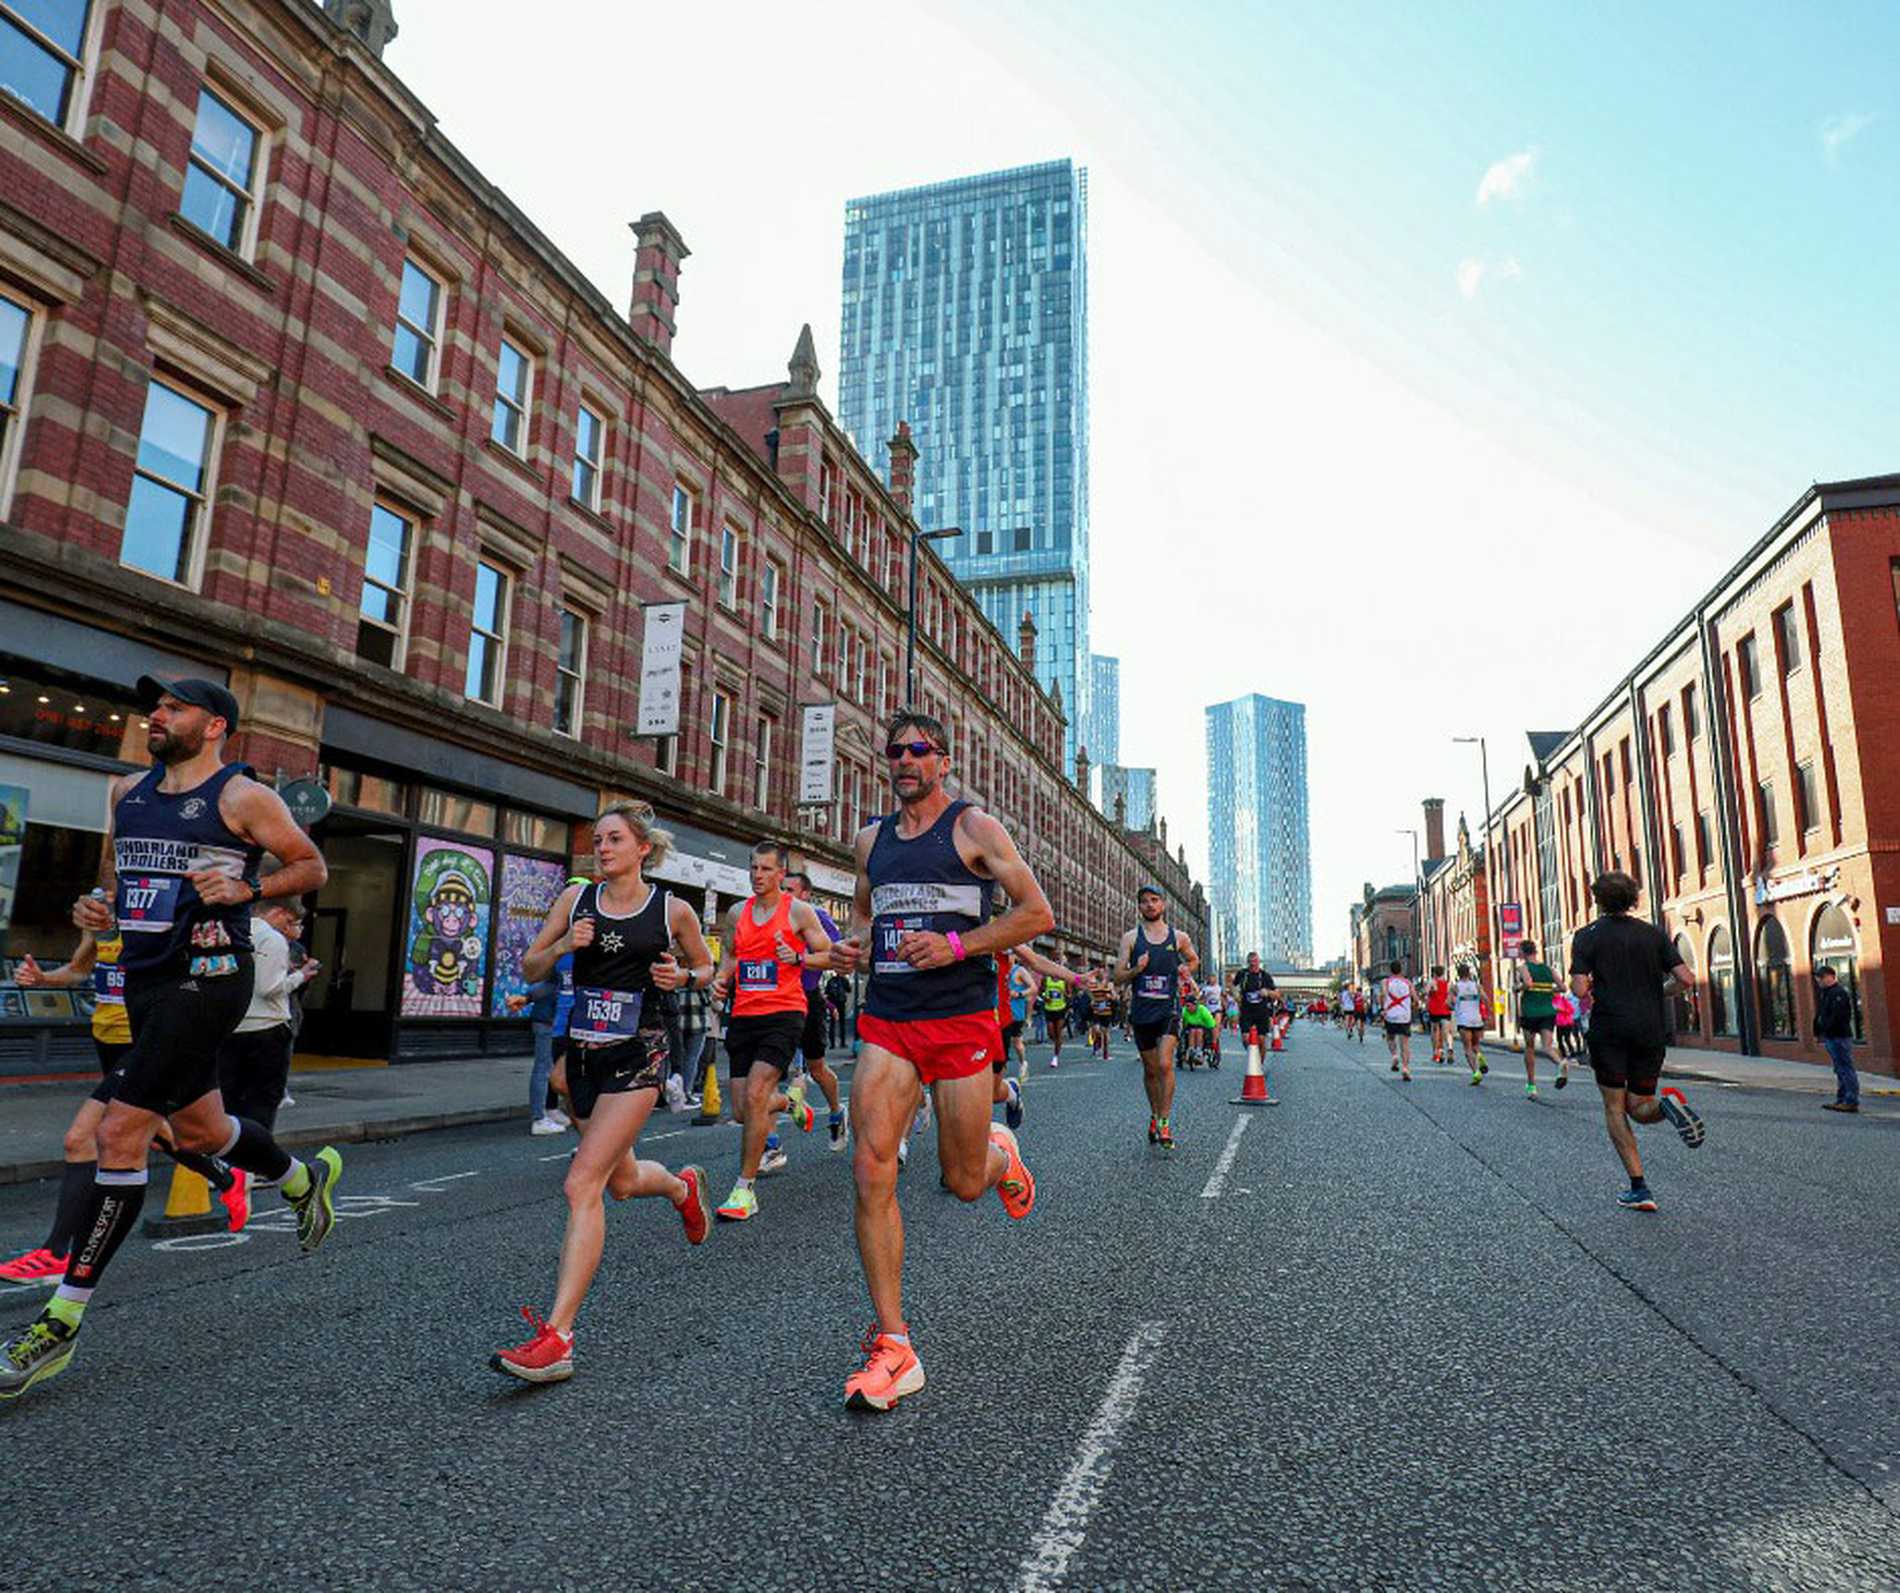 Manchester Marathon runners with the iconic Beetham Tower in the background.